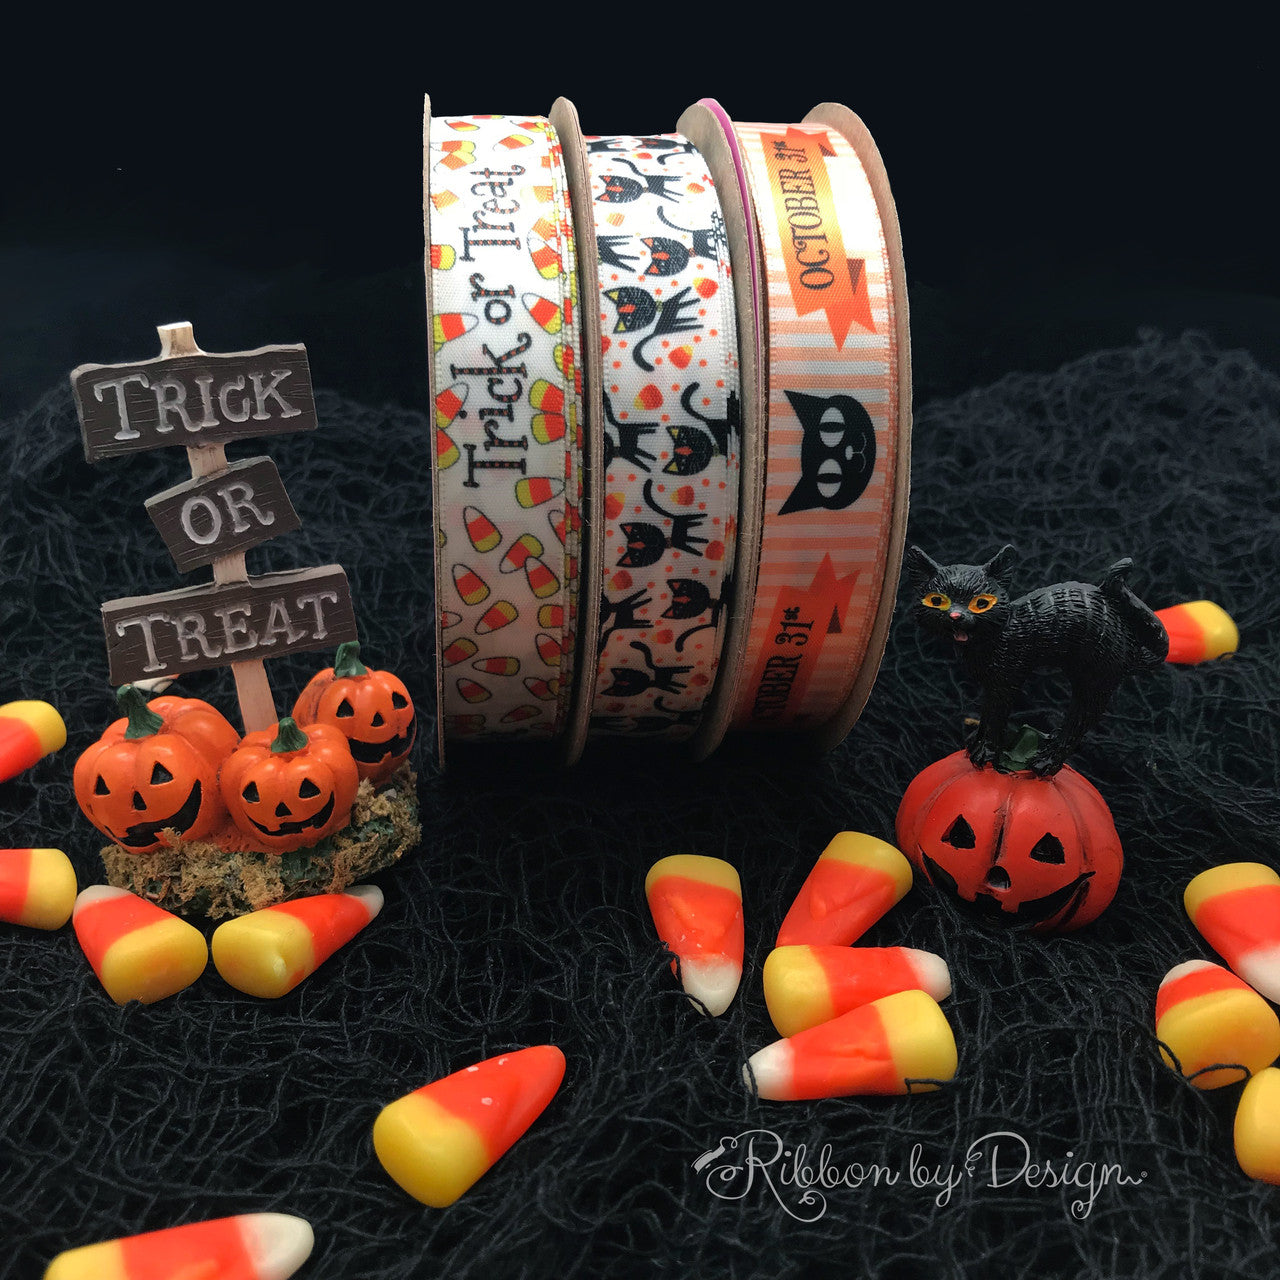 Our October 31st ribbon pairs beautifully with all our Halloween themed ribbons!